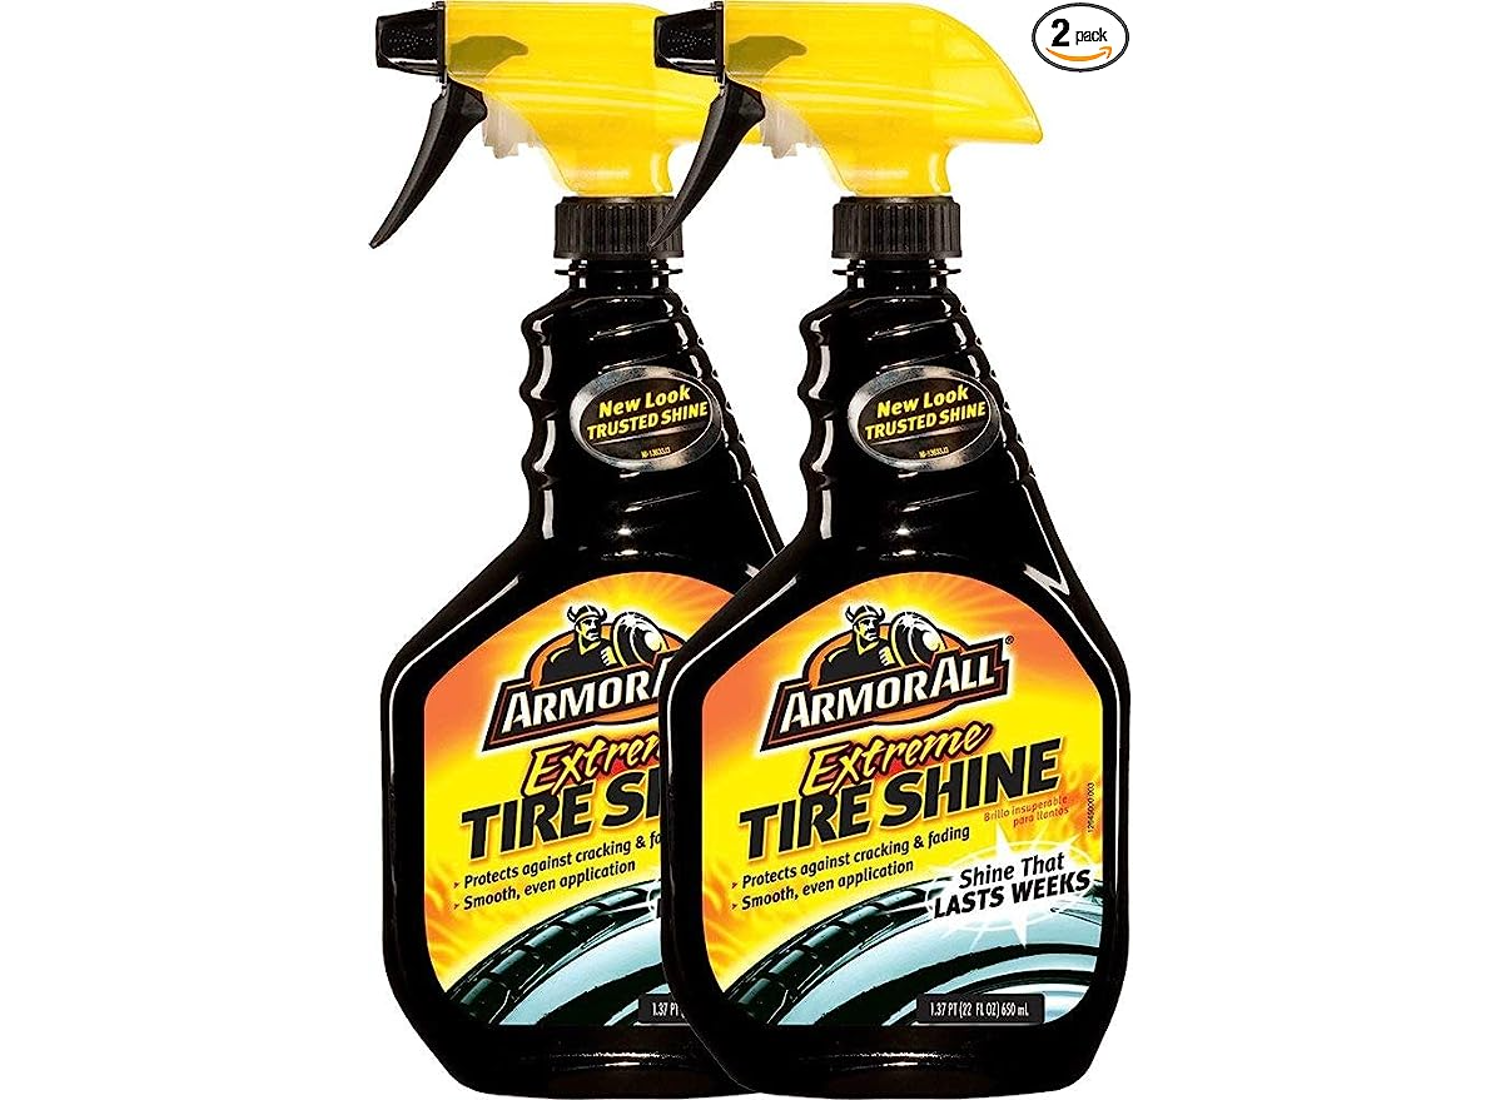 Two black bottles of spray tire shine on a white background.